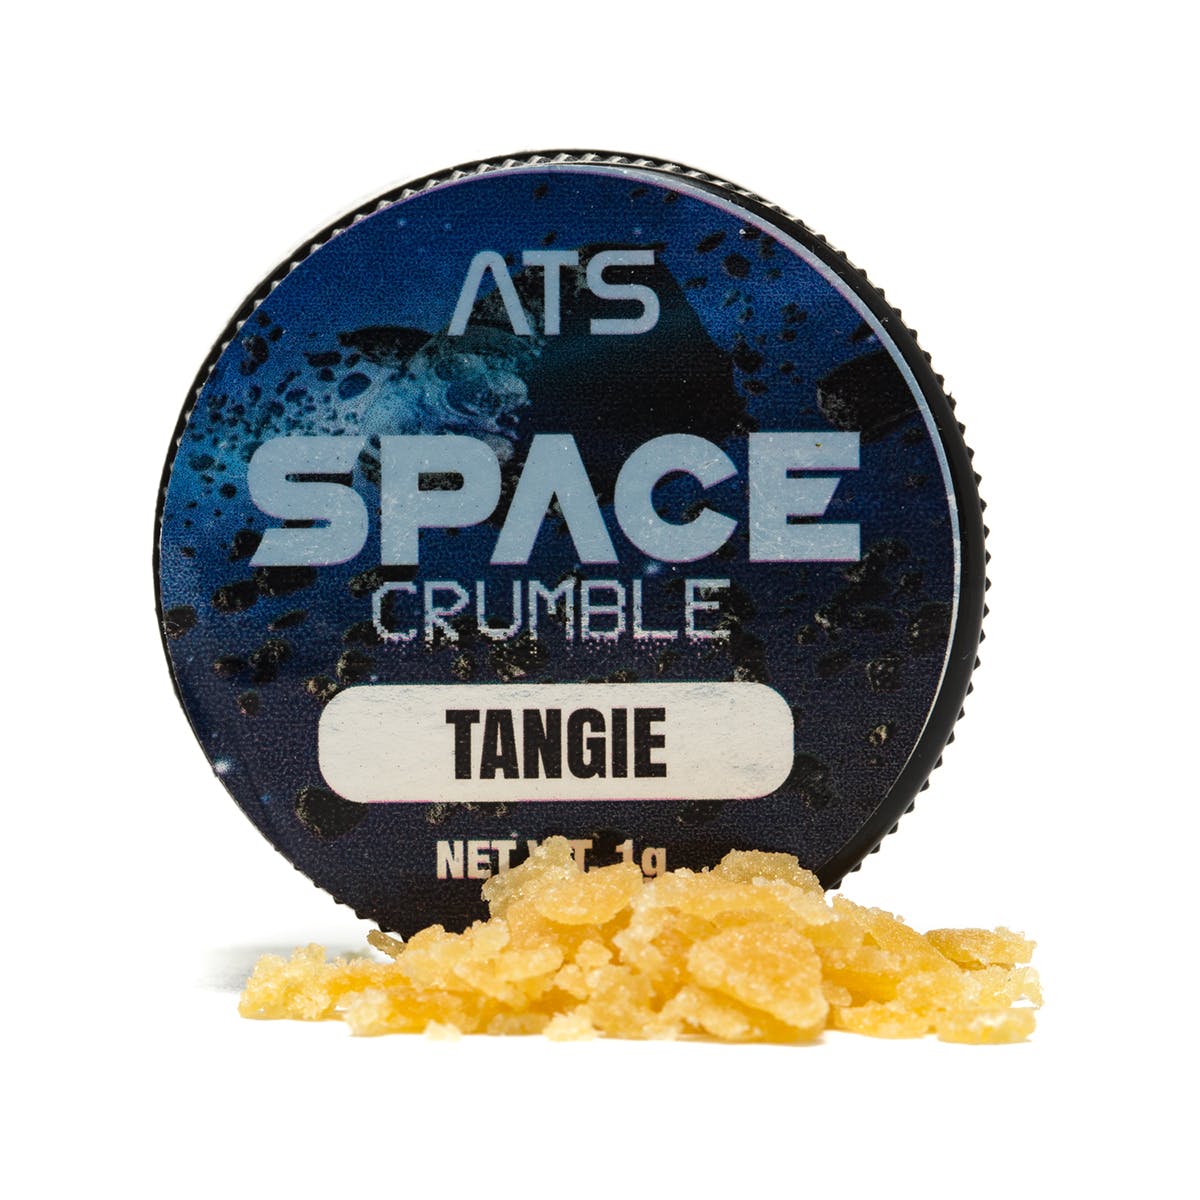 Tangie Space Crumble